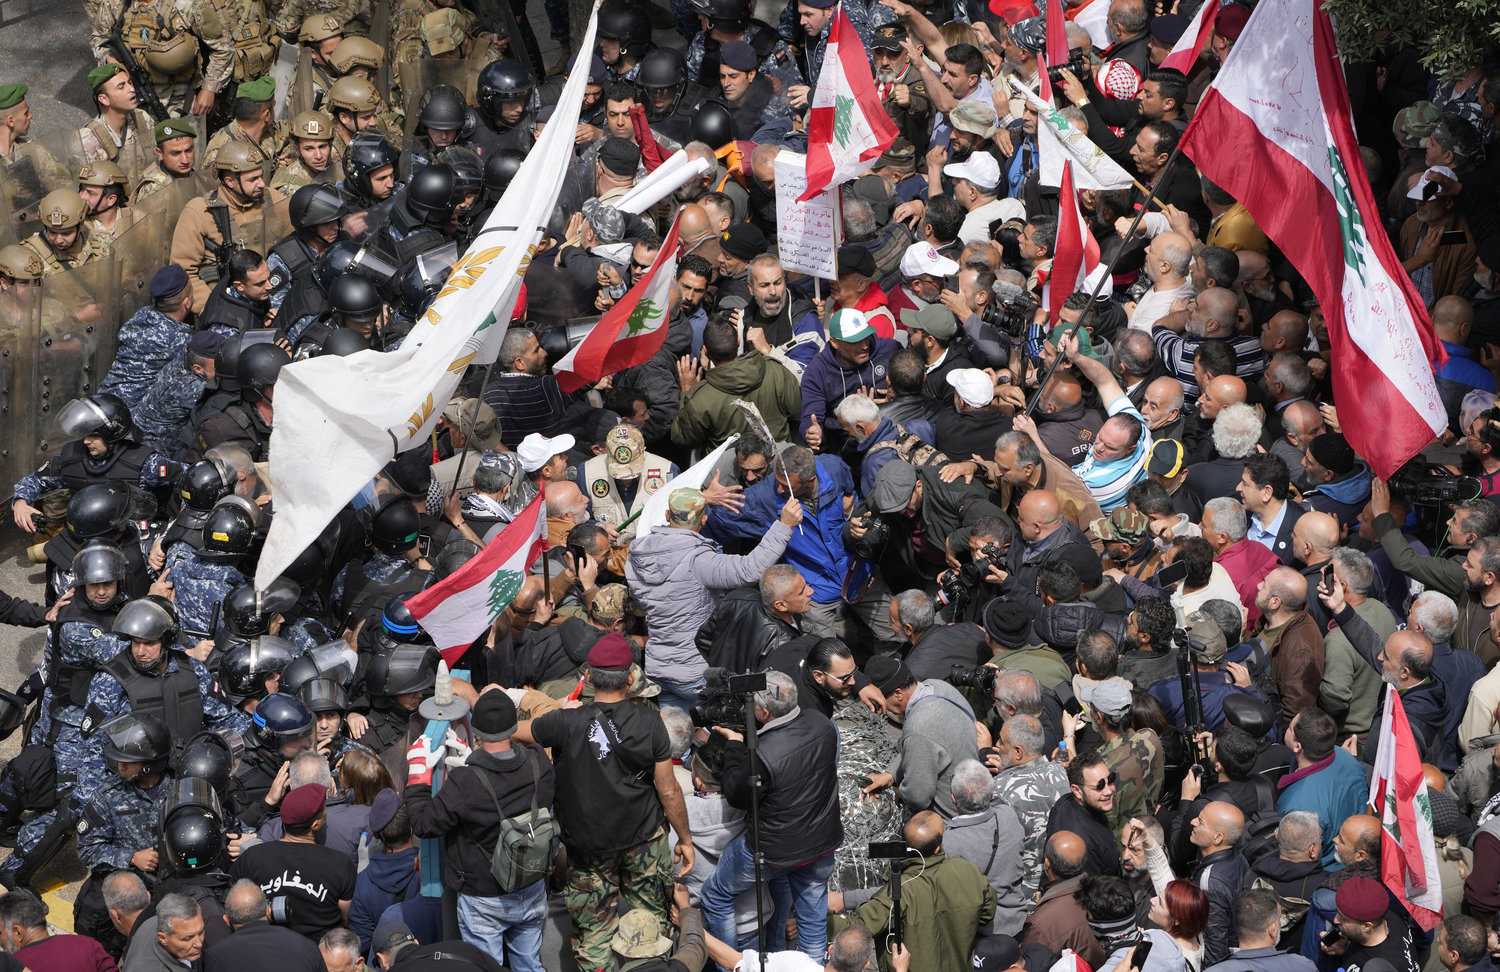 Retired army soldiers and other protesters, who are demanding better pay, clash with Lebanese army and riot police, in Beirut, Lebanon, Wednesday, March 22, 2023. (AP Photo/Hussein Malla)